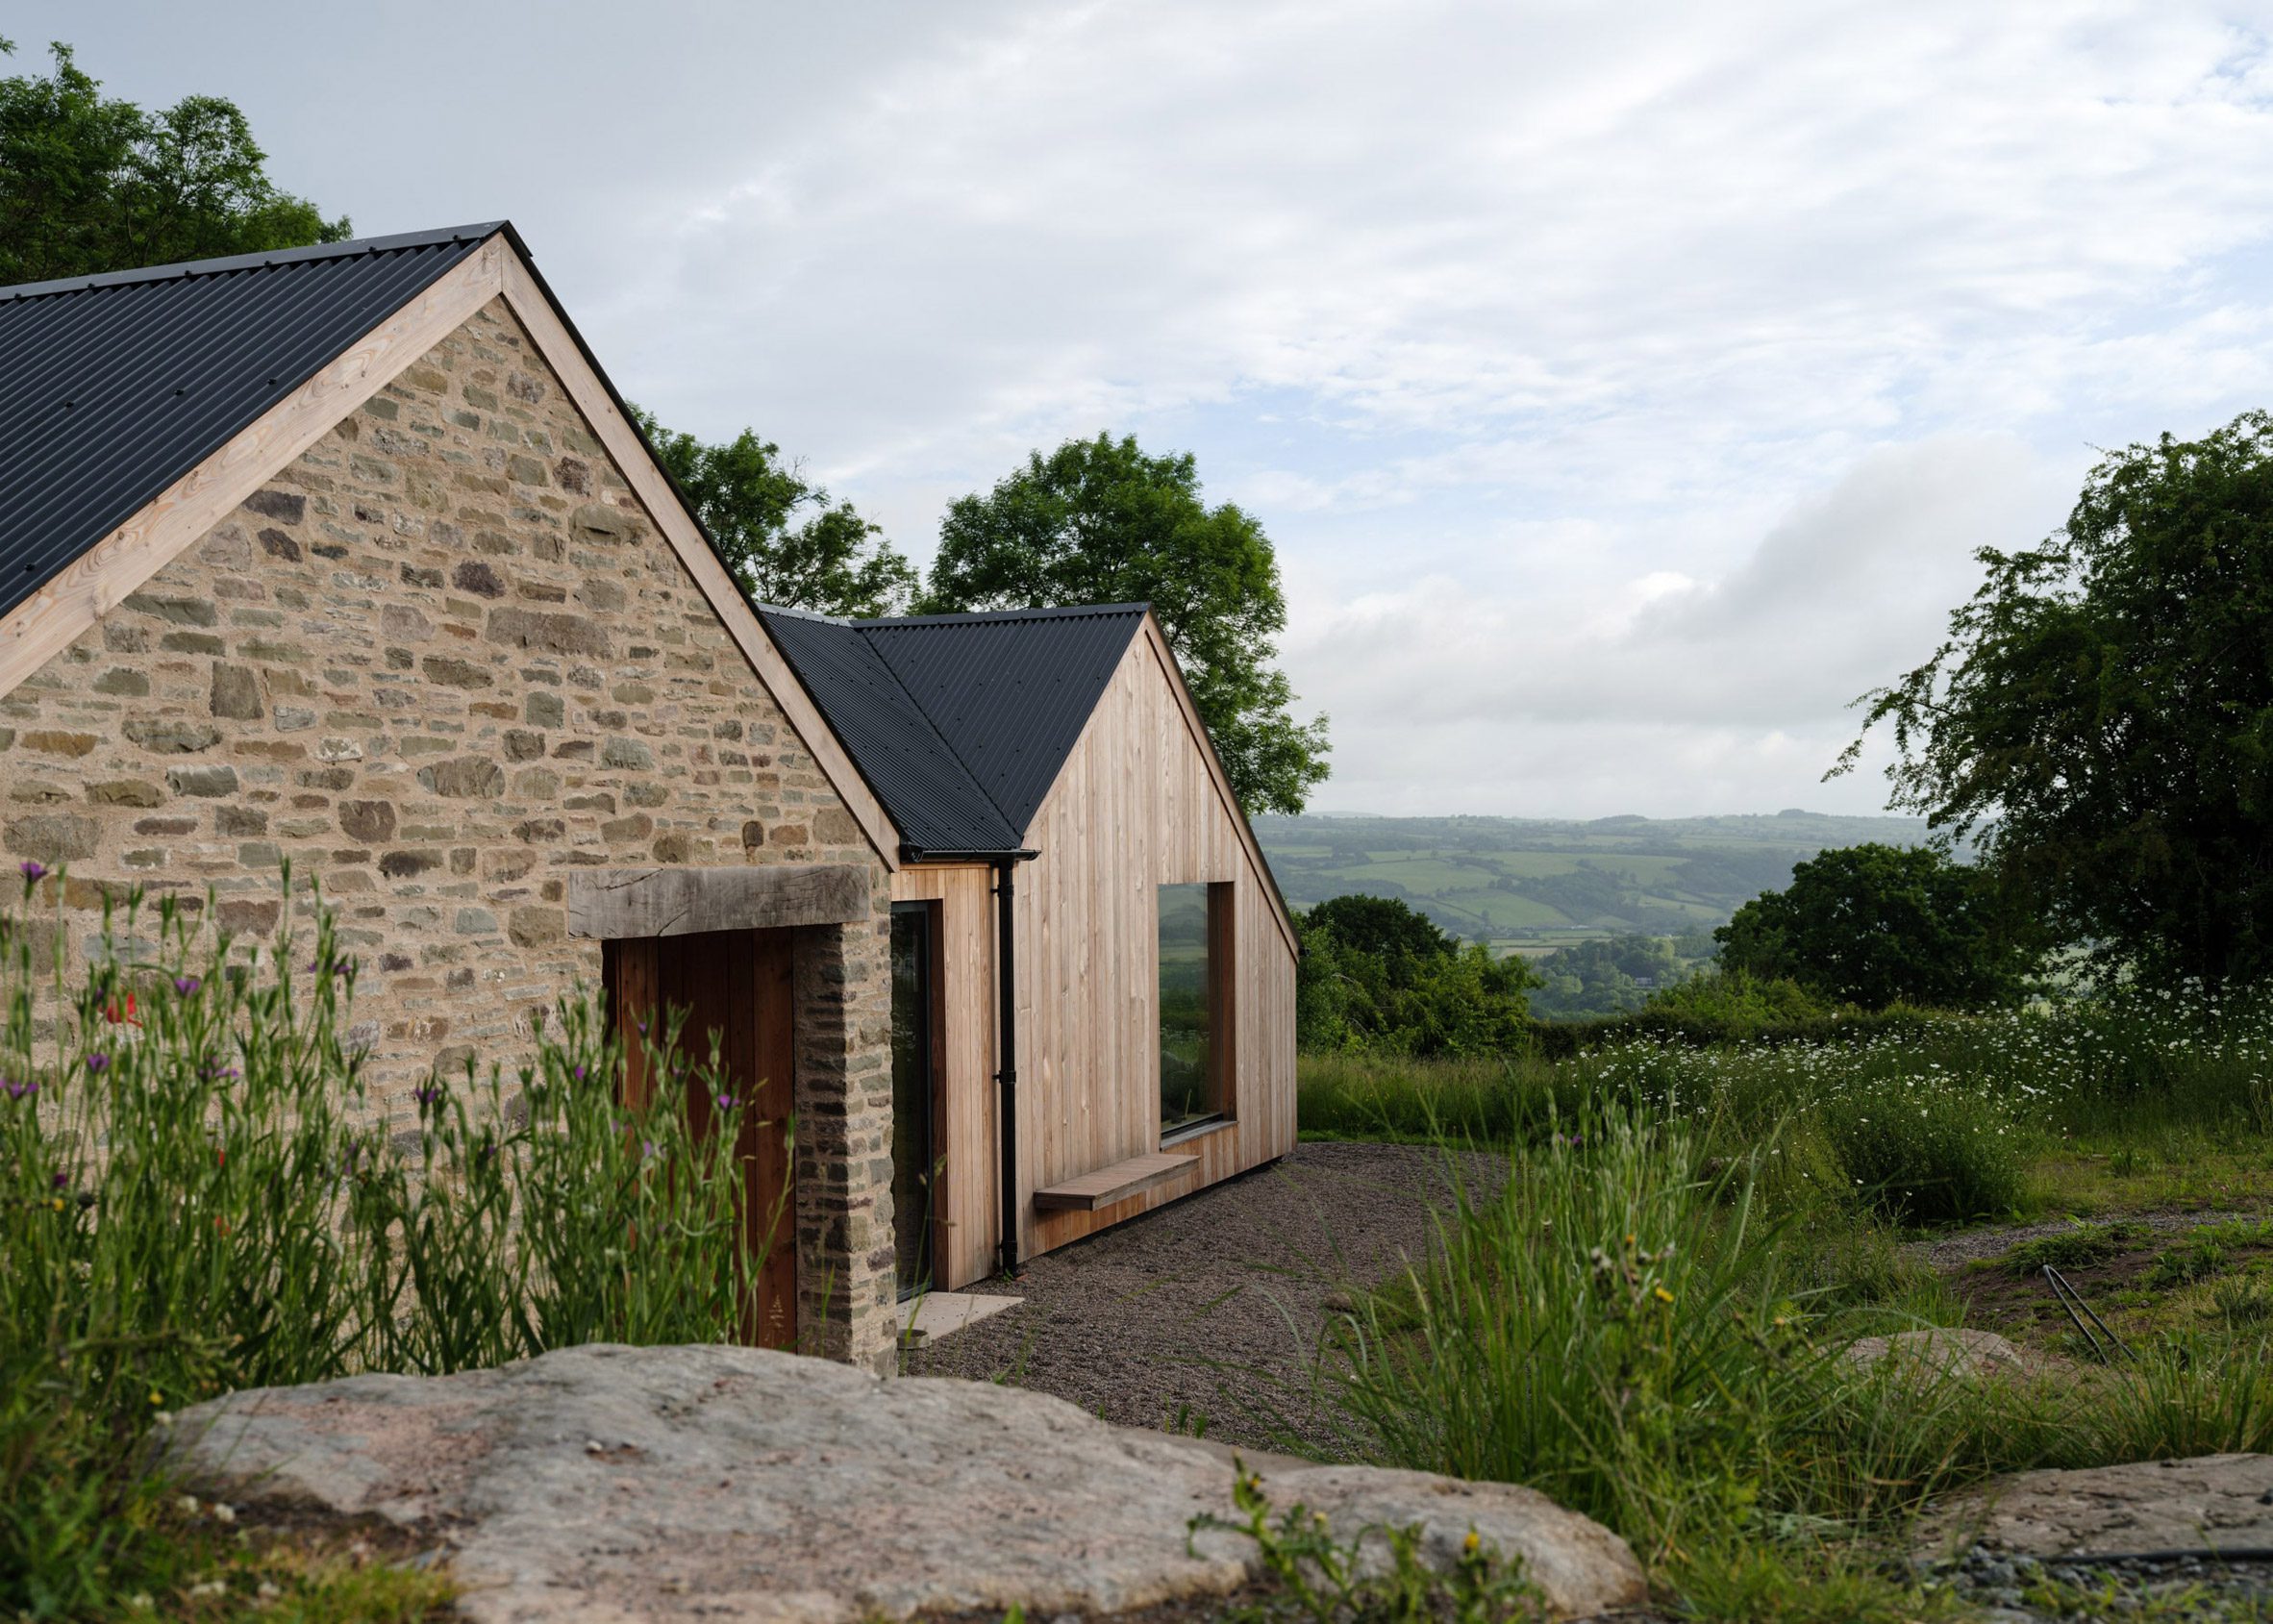 Extension attached to cottage in rural Wales